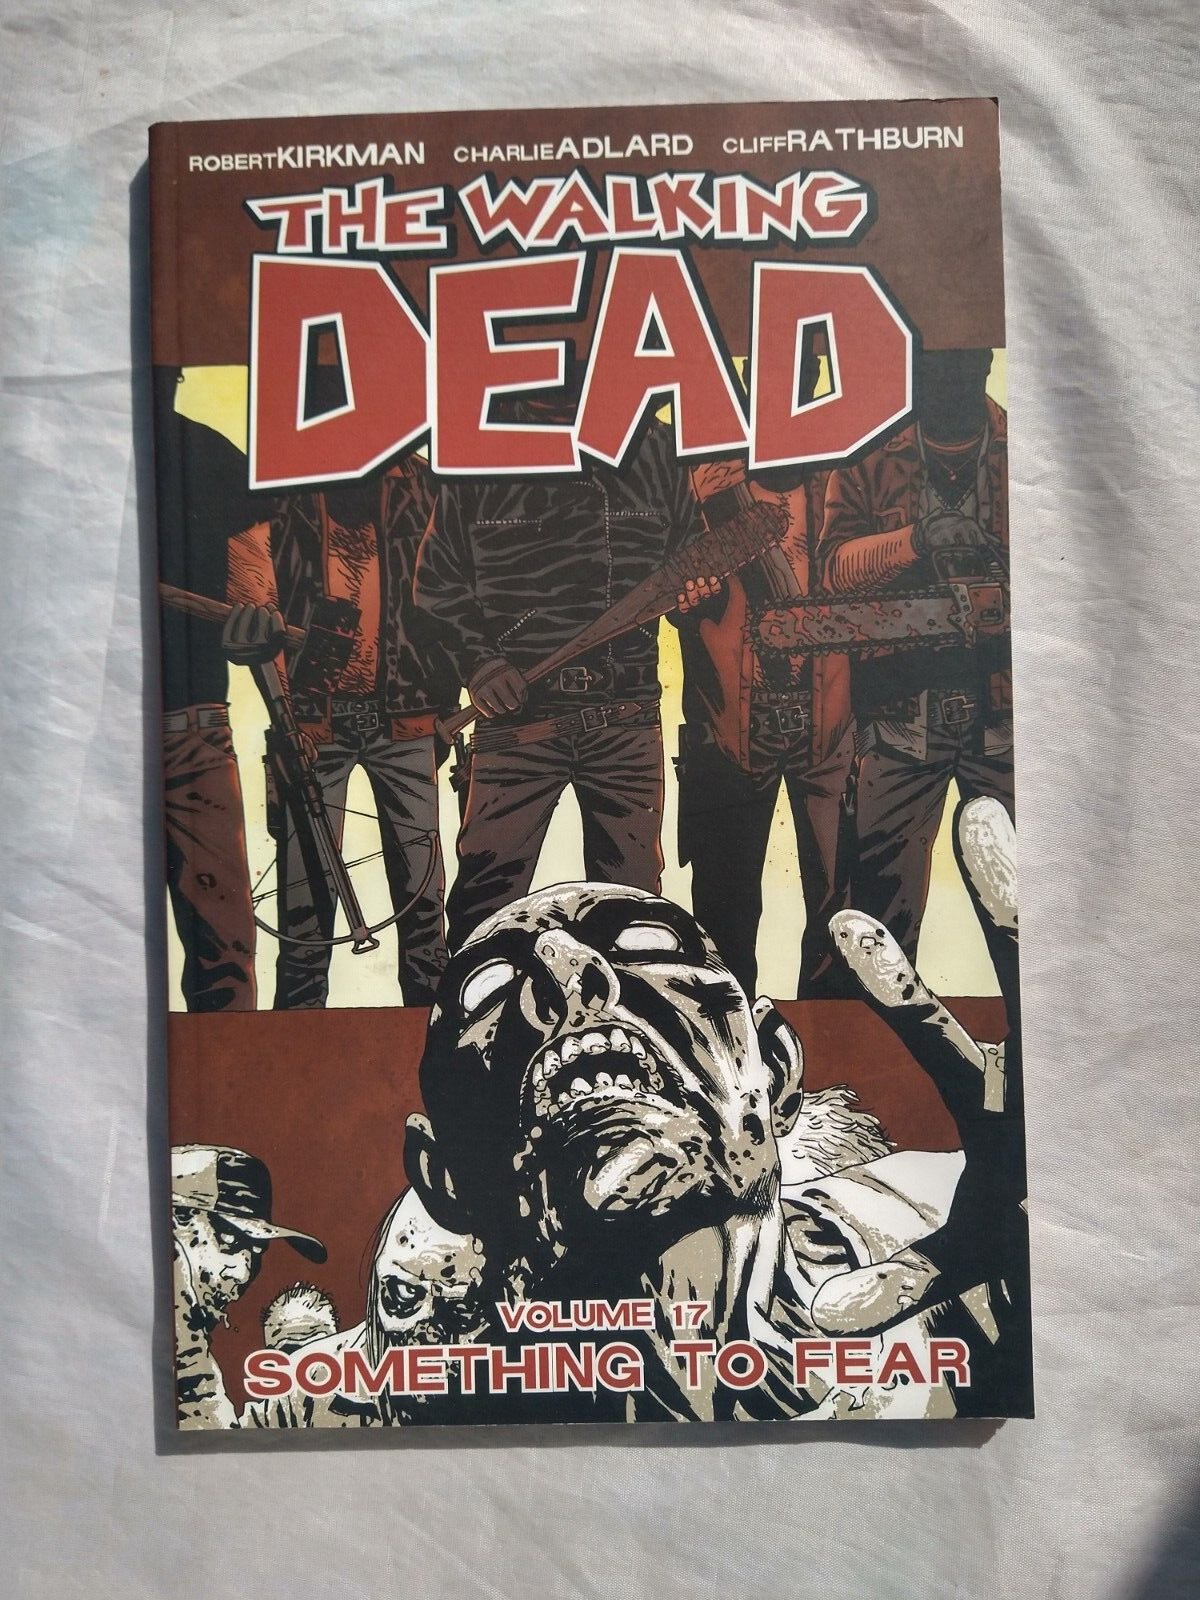 The Walking Dead Volume 17 Something to Fear Trade Paperback Image Comics